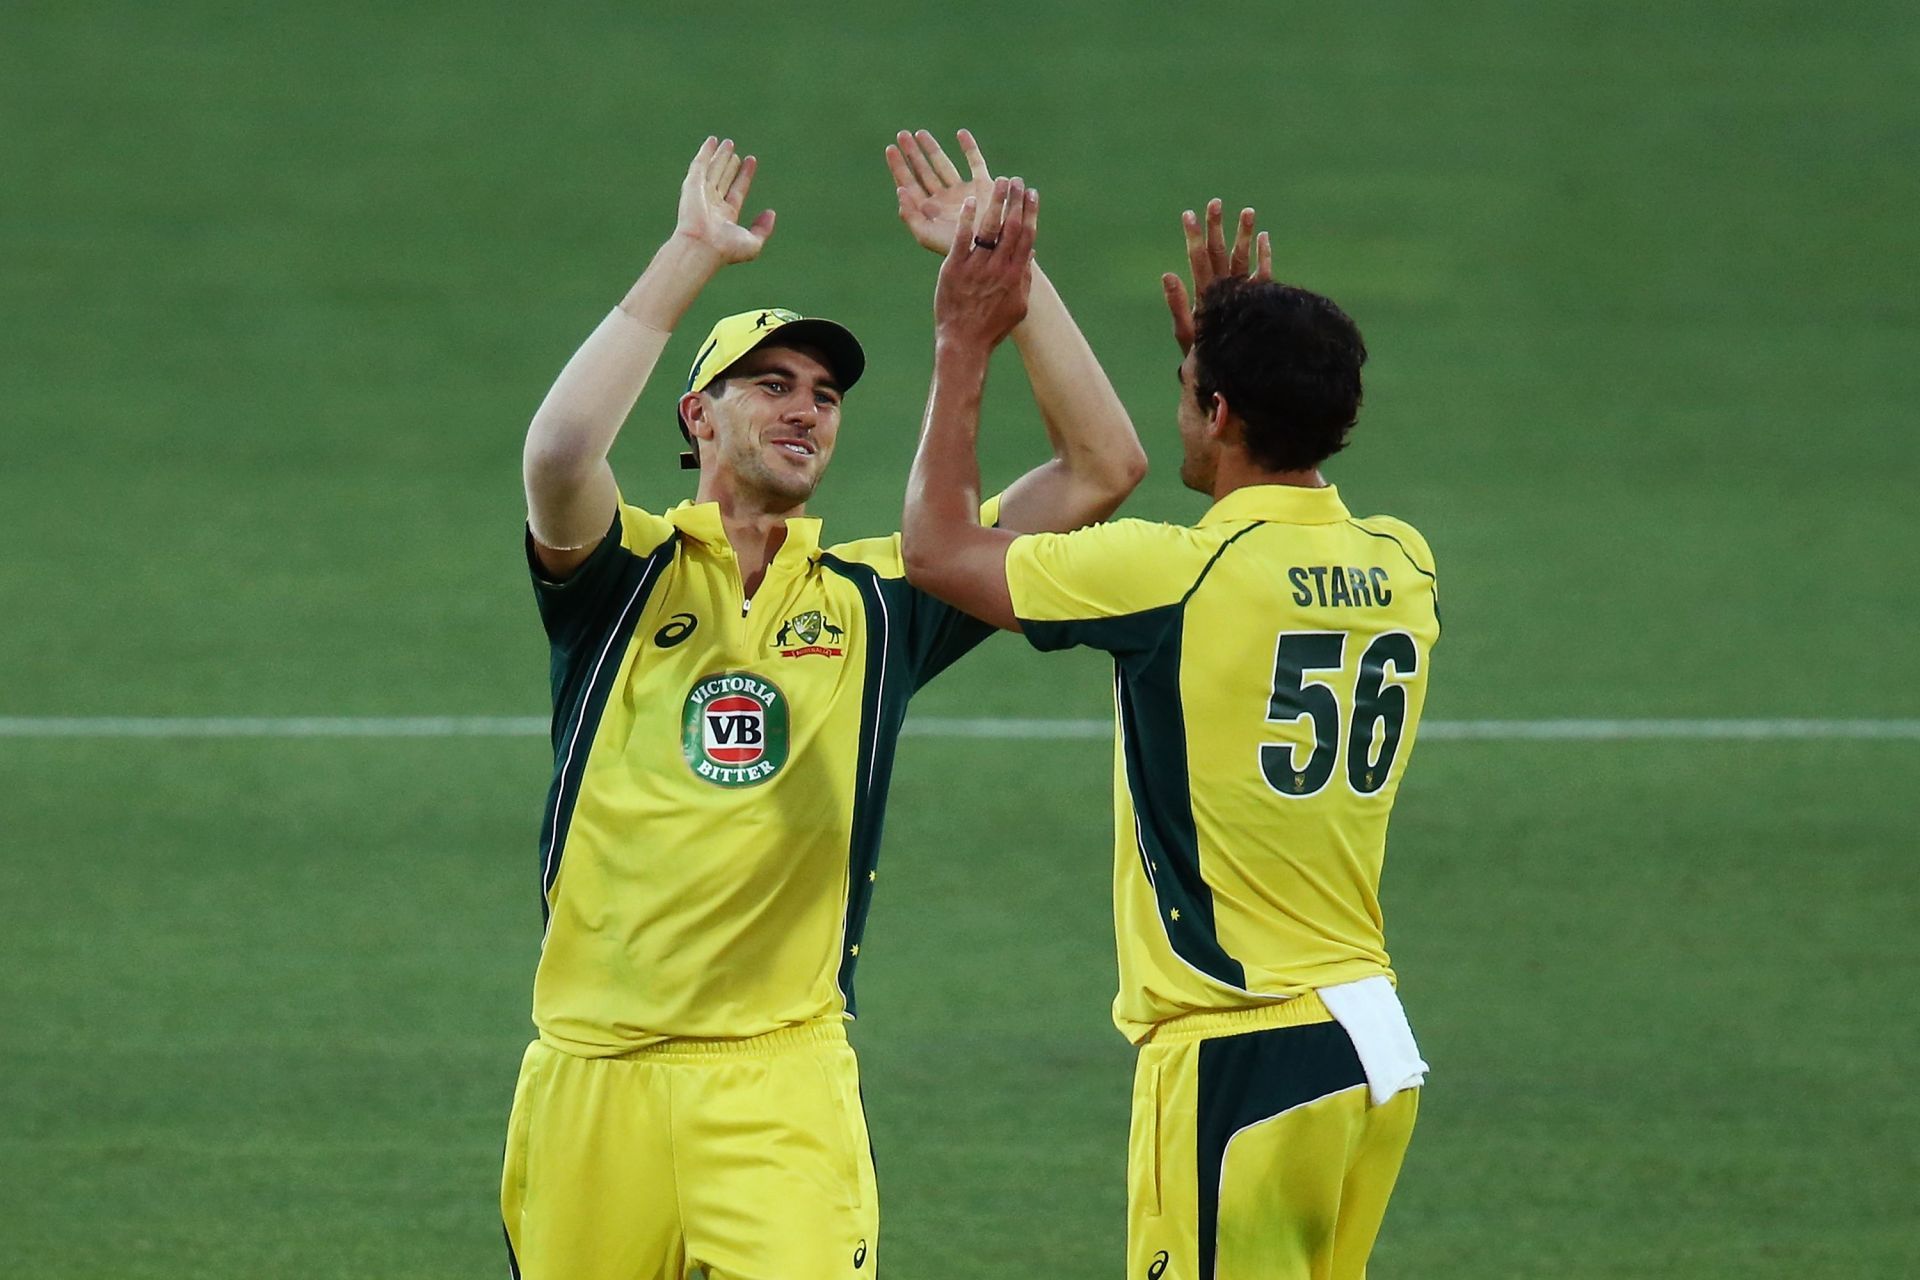 Pat Cummins and Mitchell Starc are expected to lead the Australian seam attack.